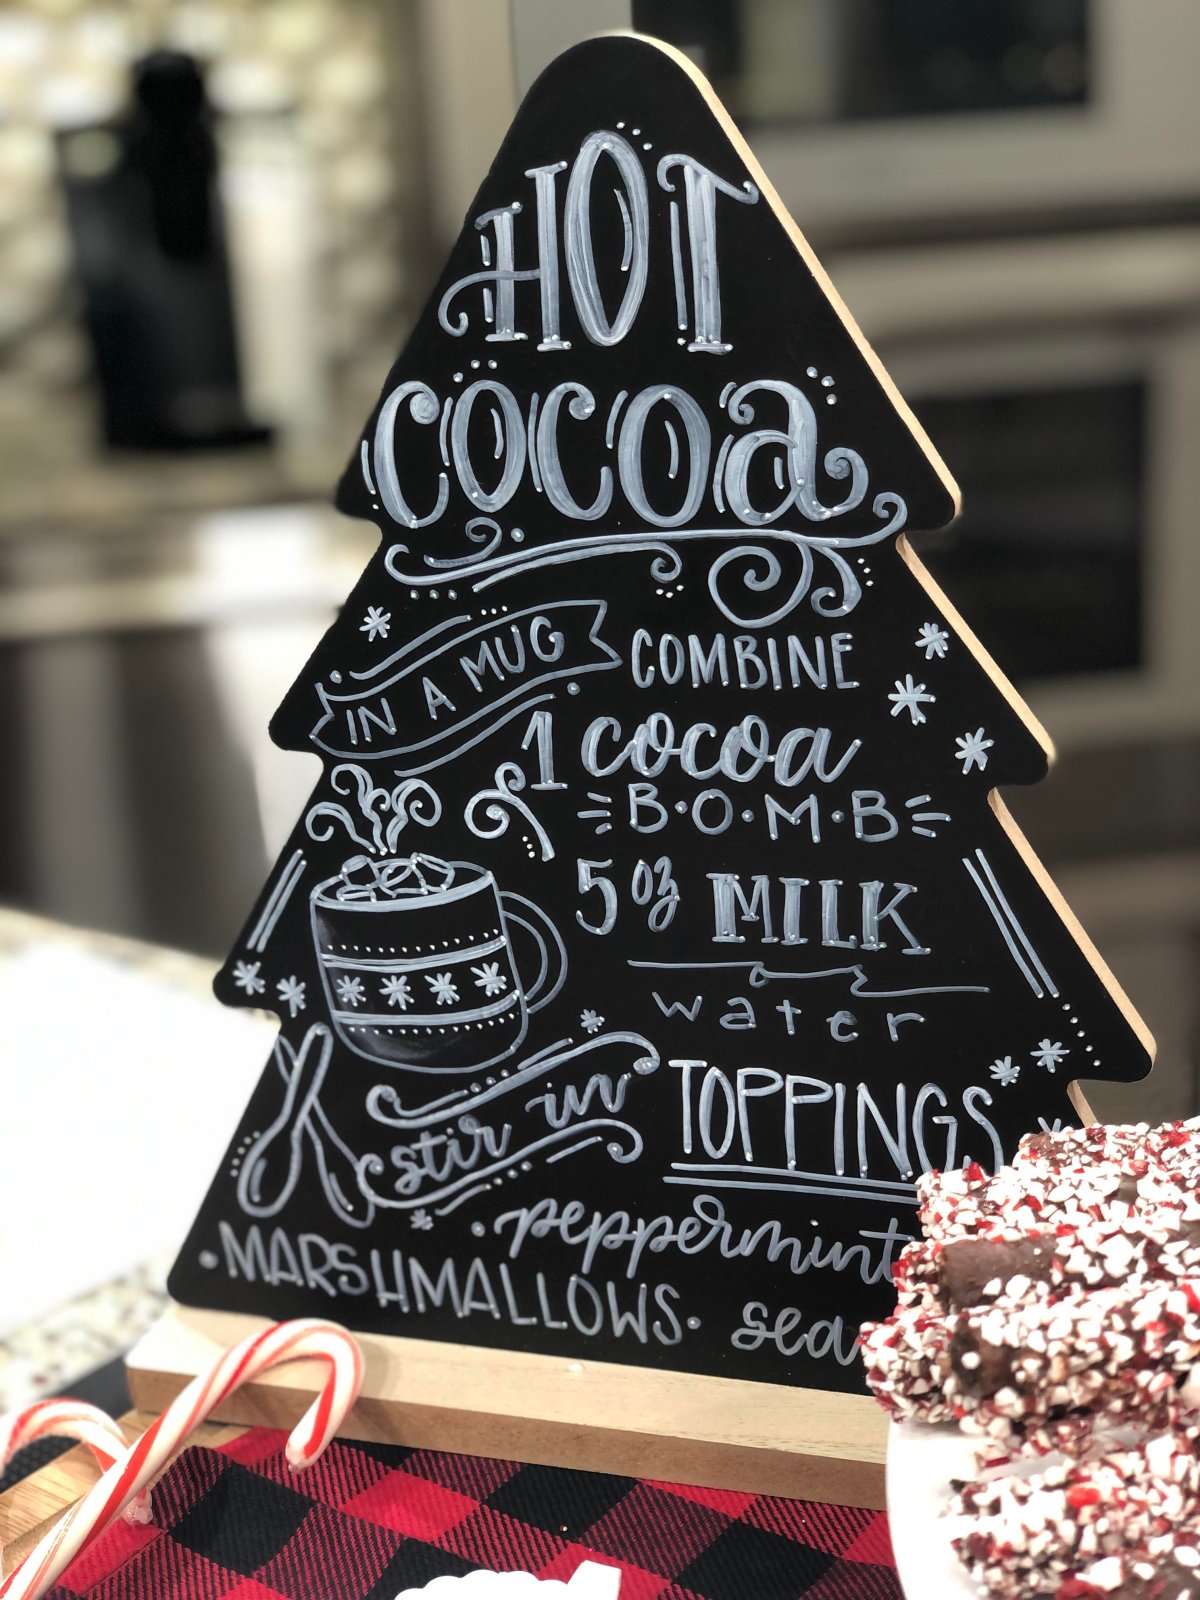 Image contains a tree shaped chalkboard sign about hot cocoa.